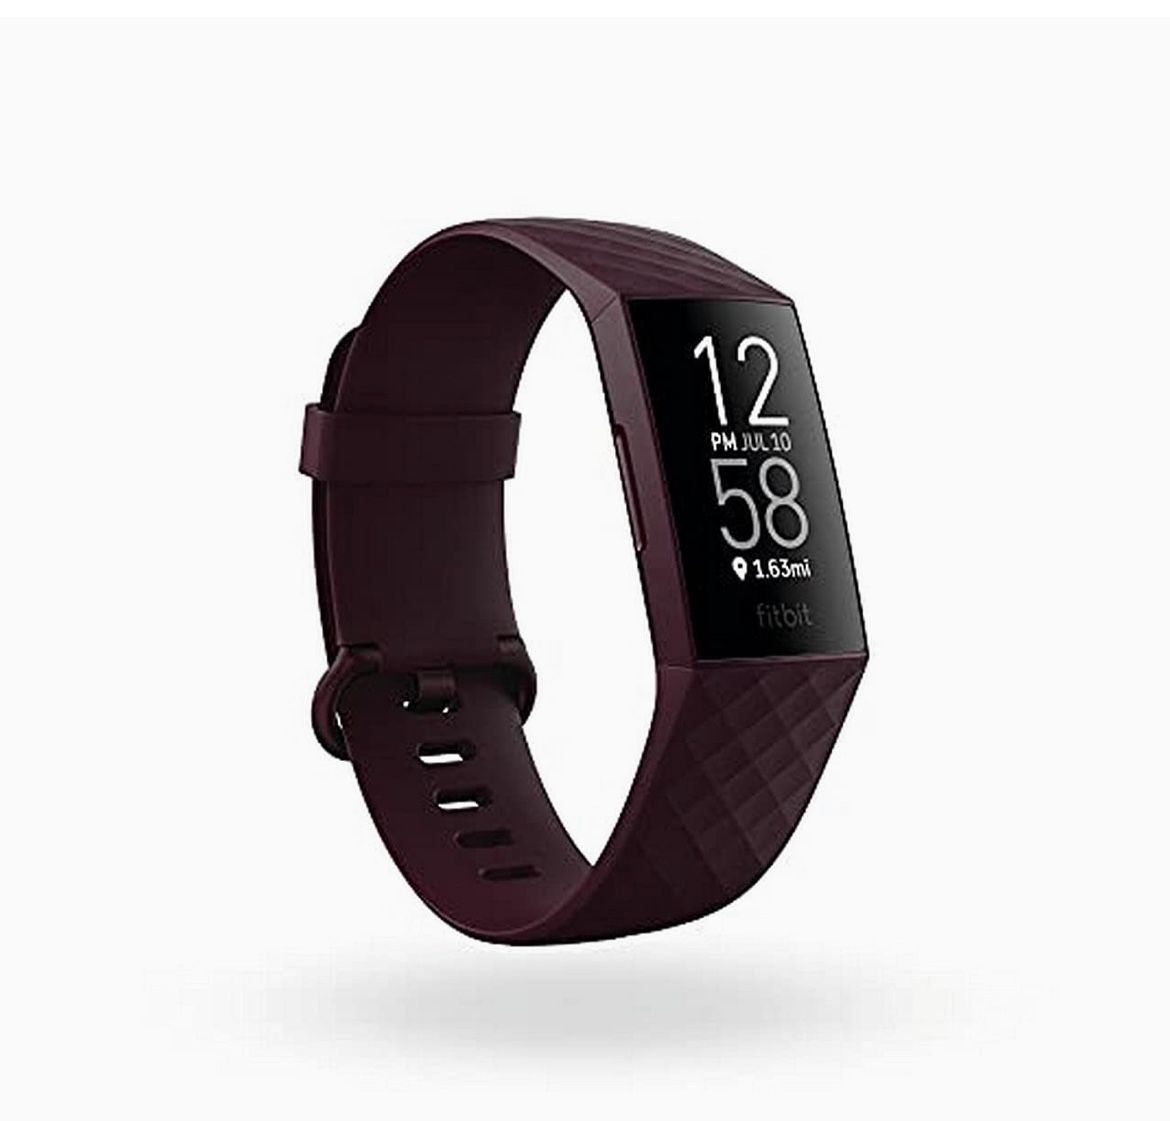 Fitbit Charge 4 Fitness and Activity Tracker Smart Watch with Built-in GPS, Heart Rate, Sleep & Swim Tracking, Rosewood